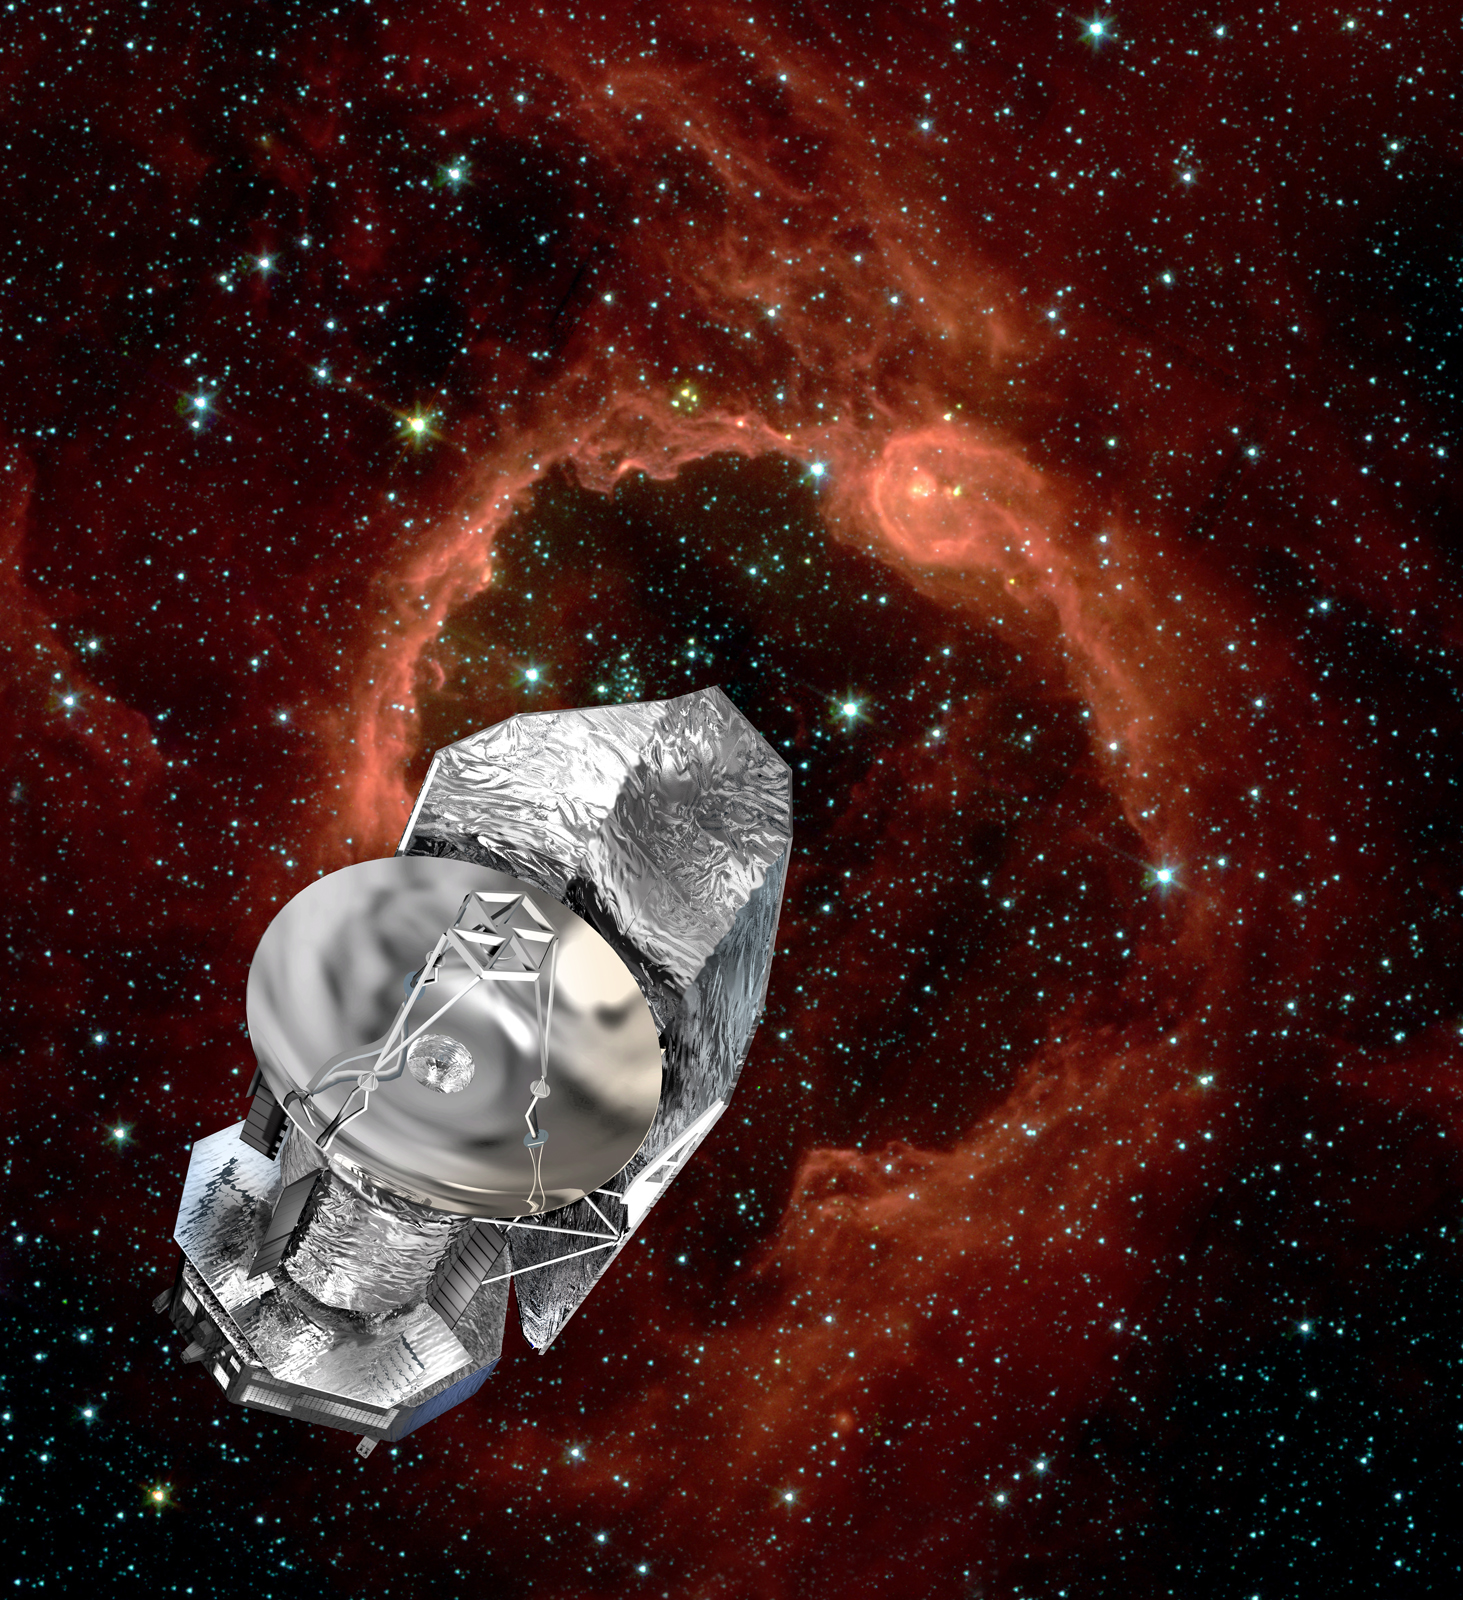 Artistic Image of the Herschel Space Observatory